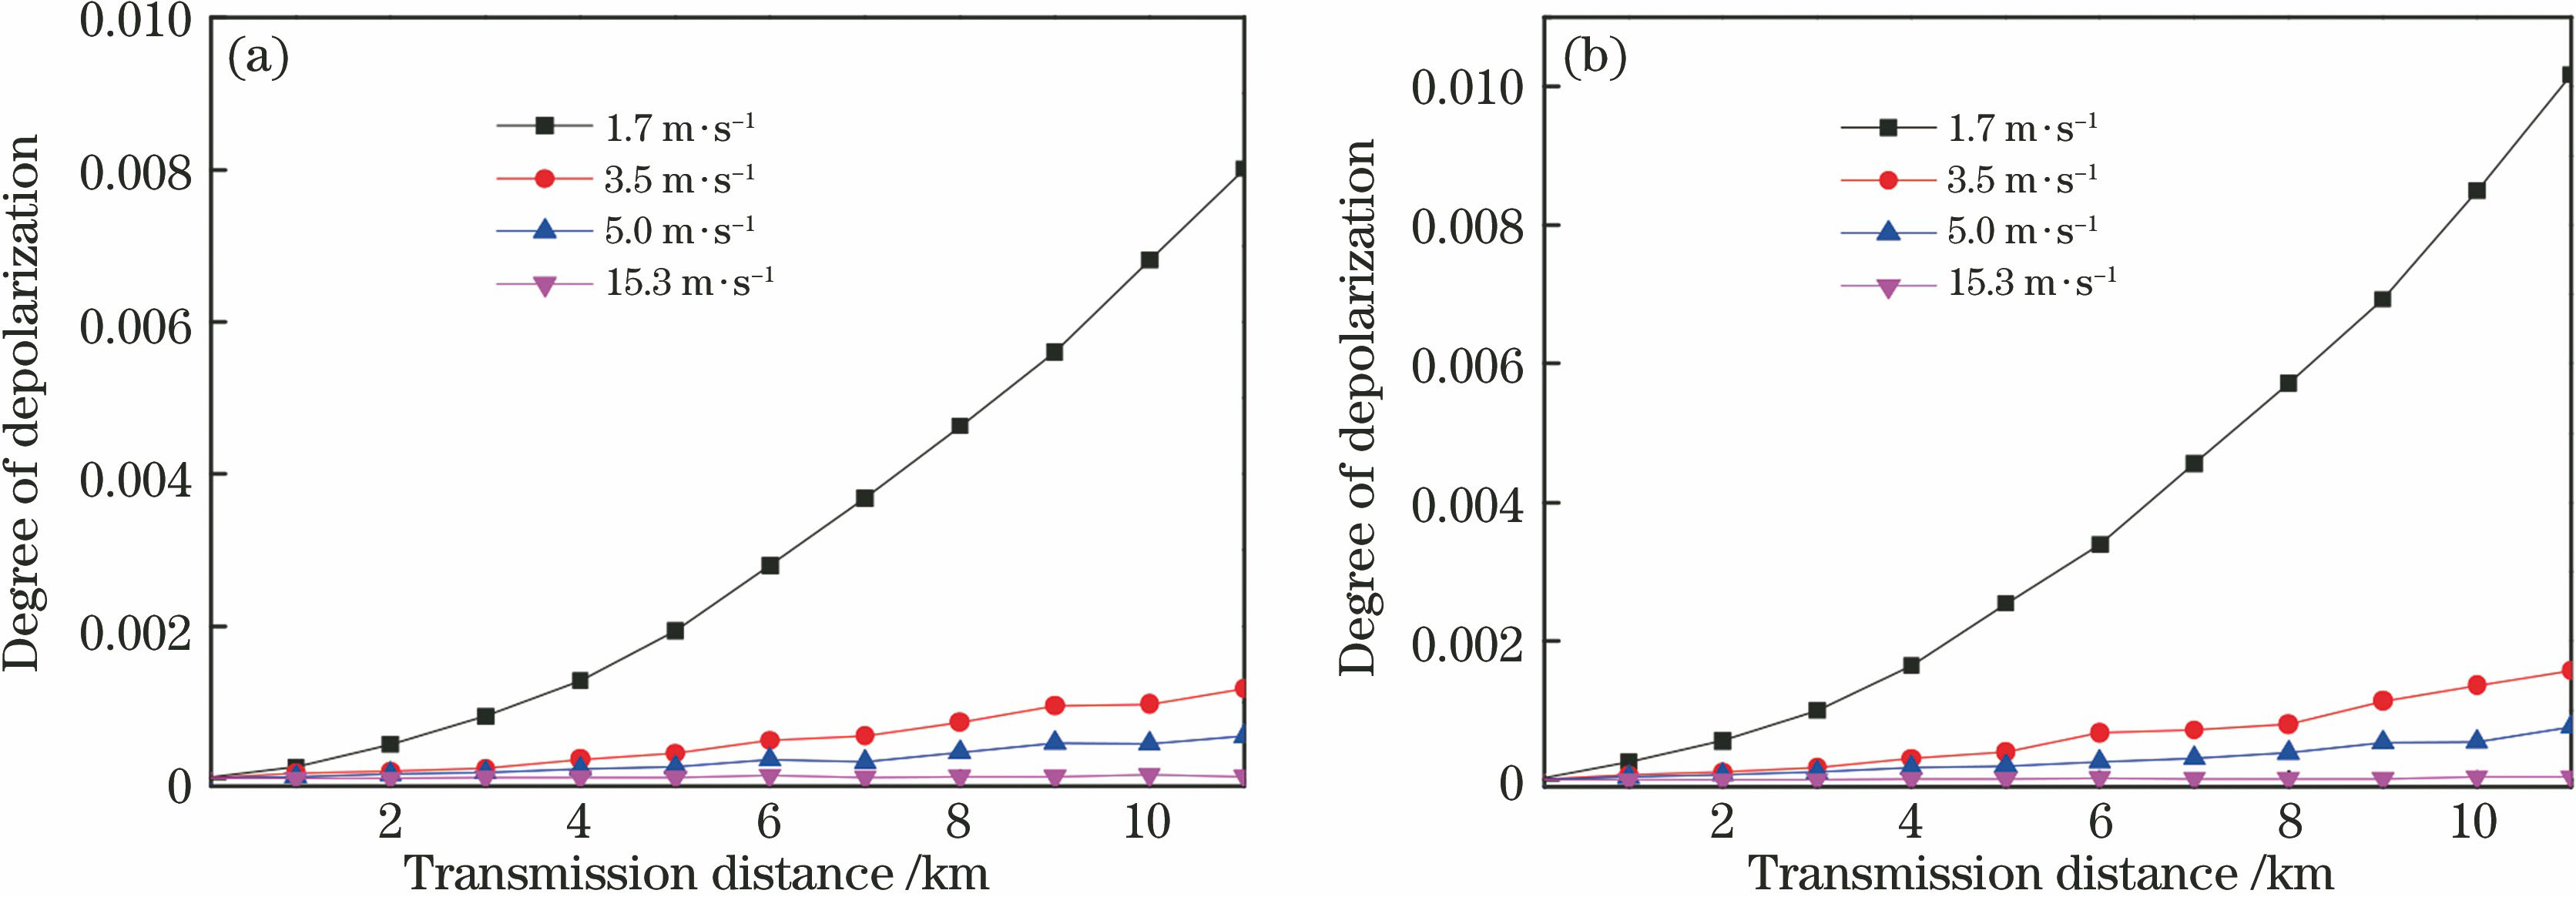 Degree of depolarization of polarized light varying with transmission distance in different-particle-size dust at different wind speeds. (a) reff=2。34 μm, veff=0。86 μm; (b) reff=1。85 μm, veff=0。51 μm